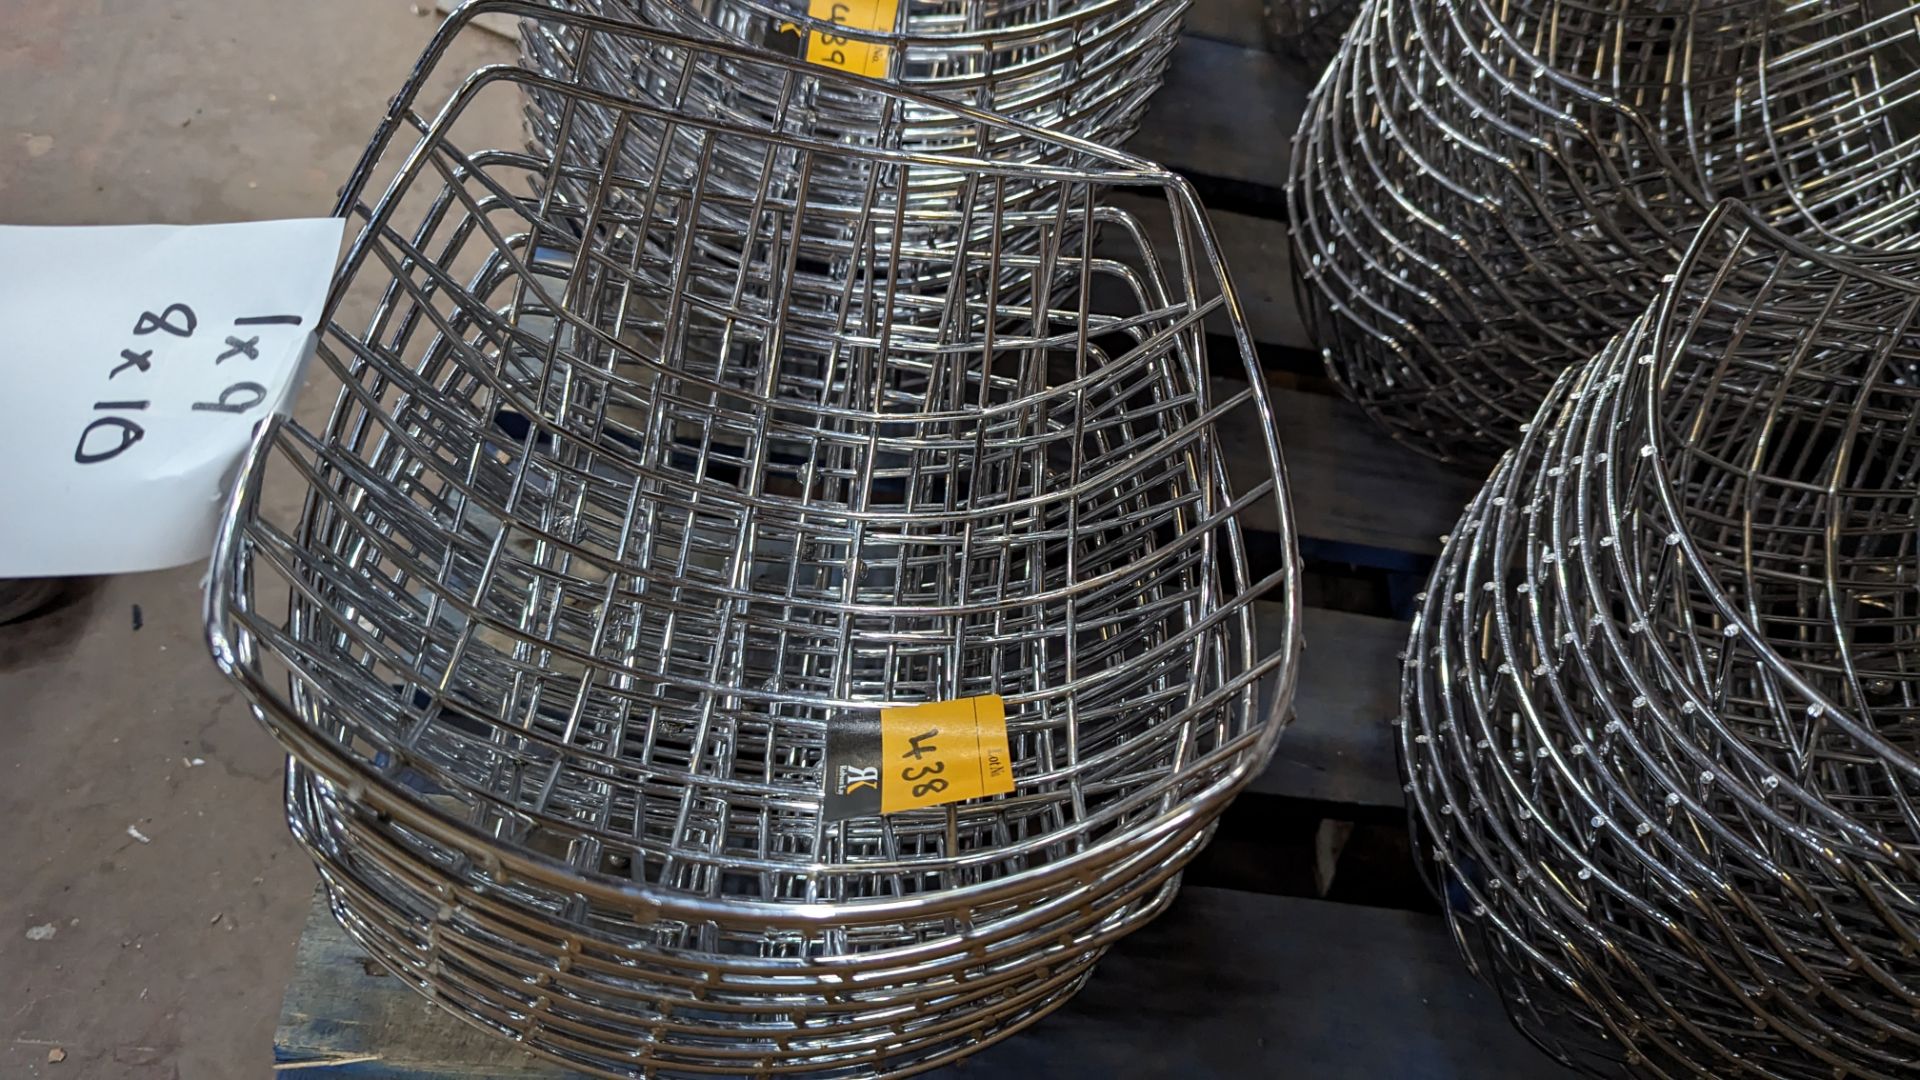 29 off chrome wire baskets each measuring approximately 240mm square - 3 stacks - Image 3 of 5